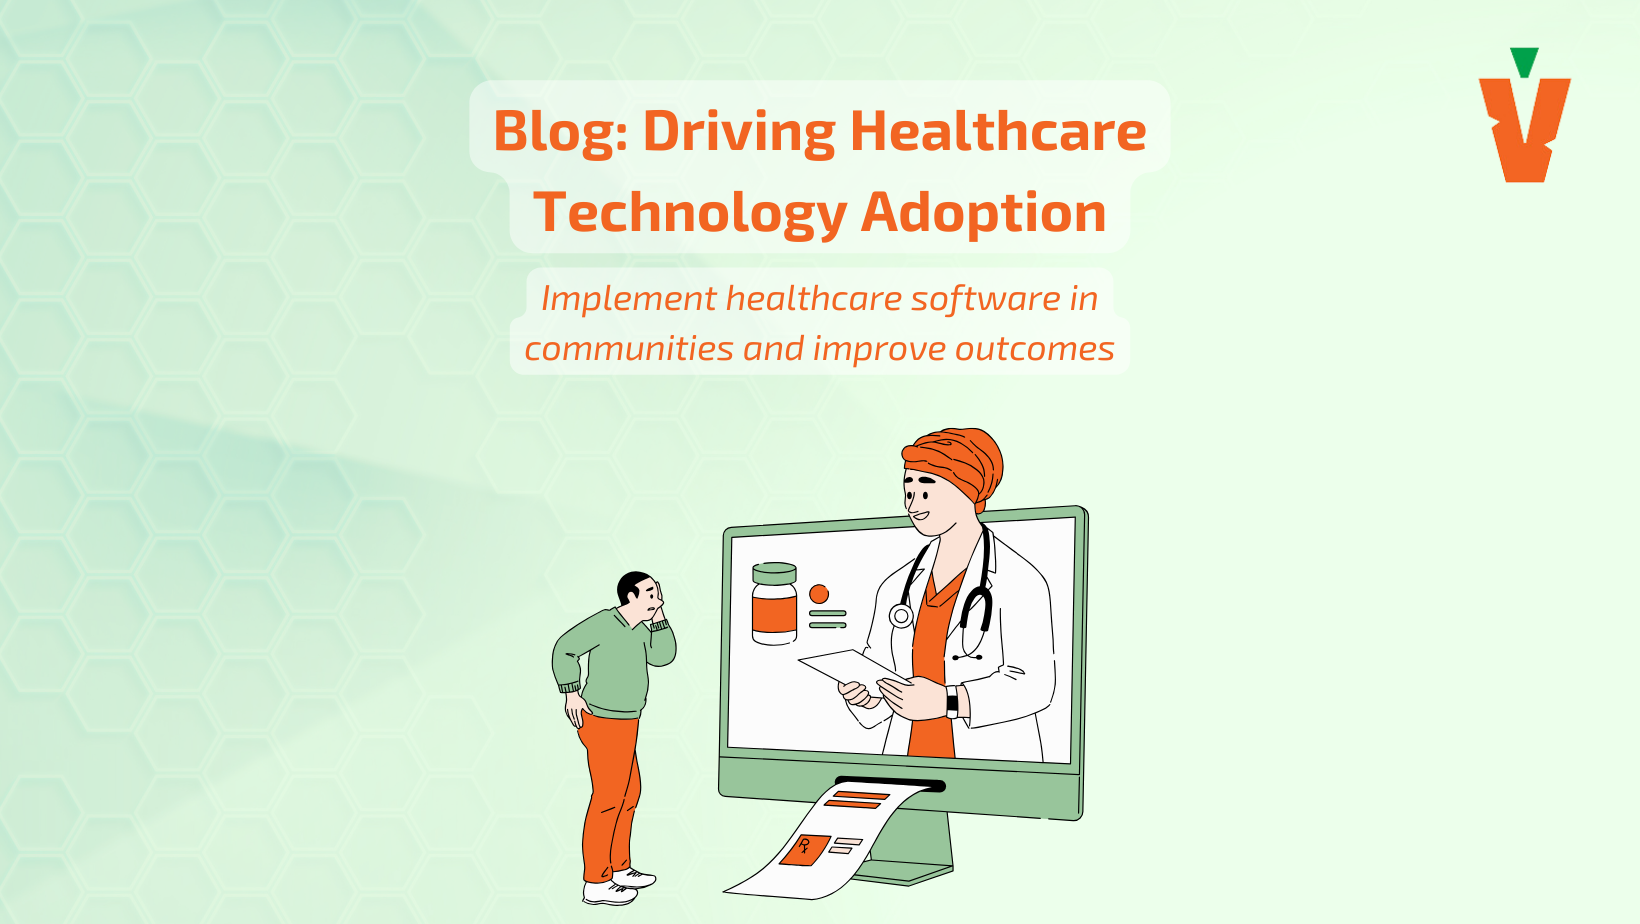 How to Drive Technology Adoption in Healthcare Communities